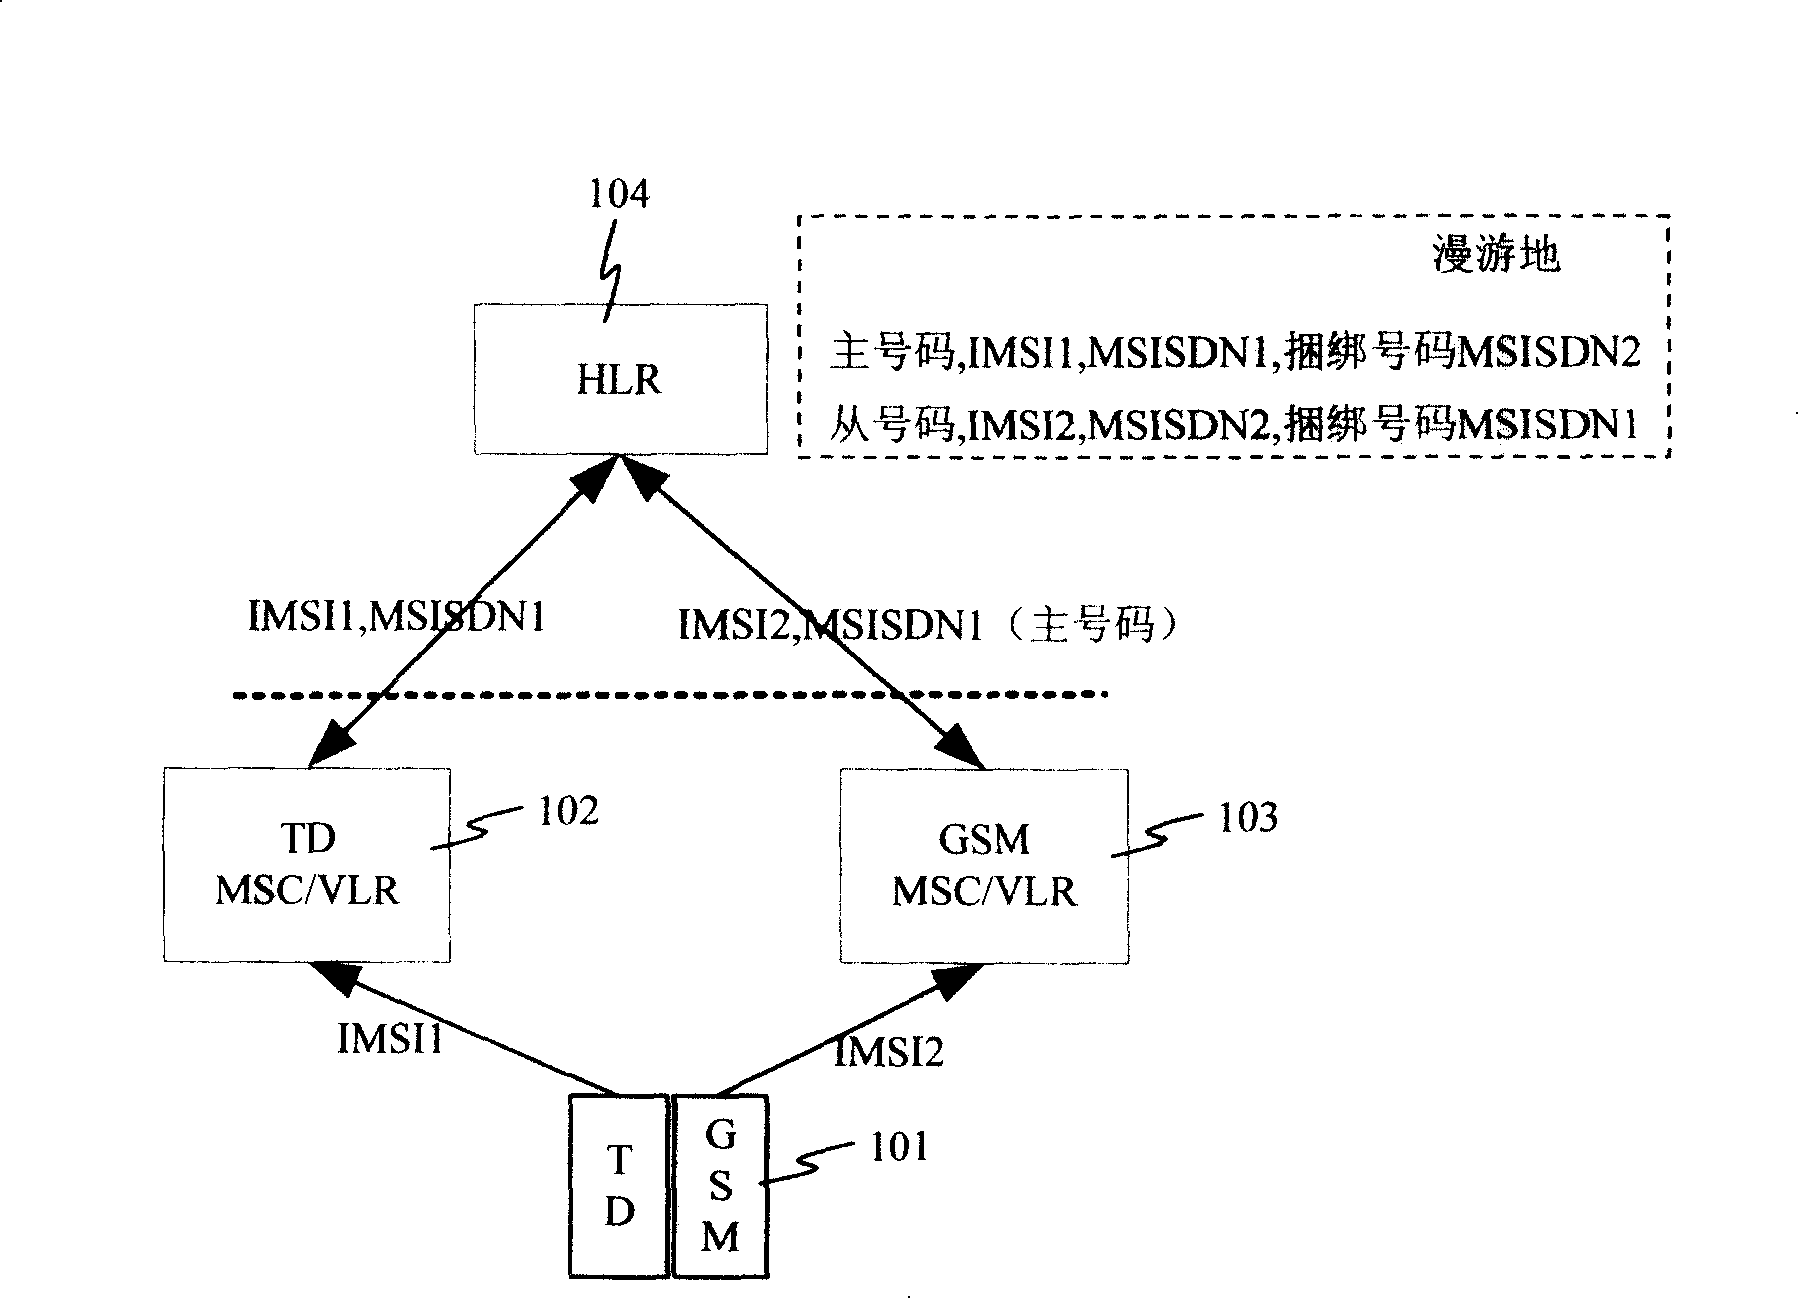 A method for dual-mode, dual-card and dual-idle terminal to realizing single number